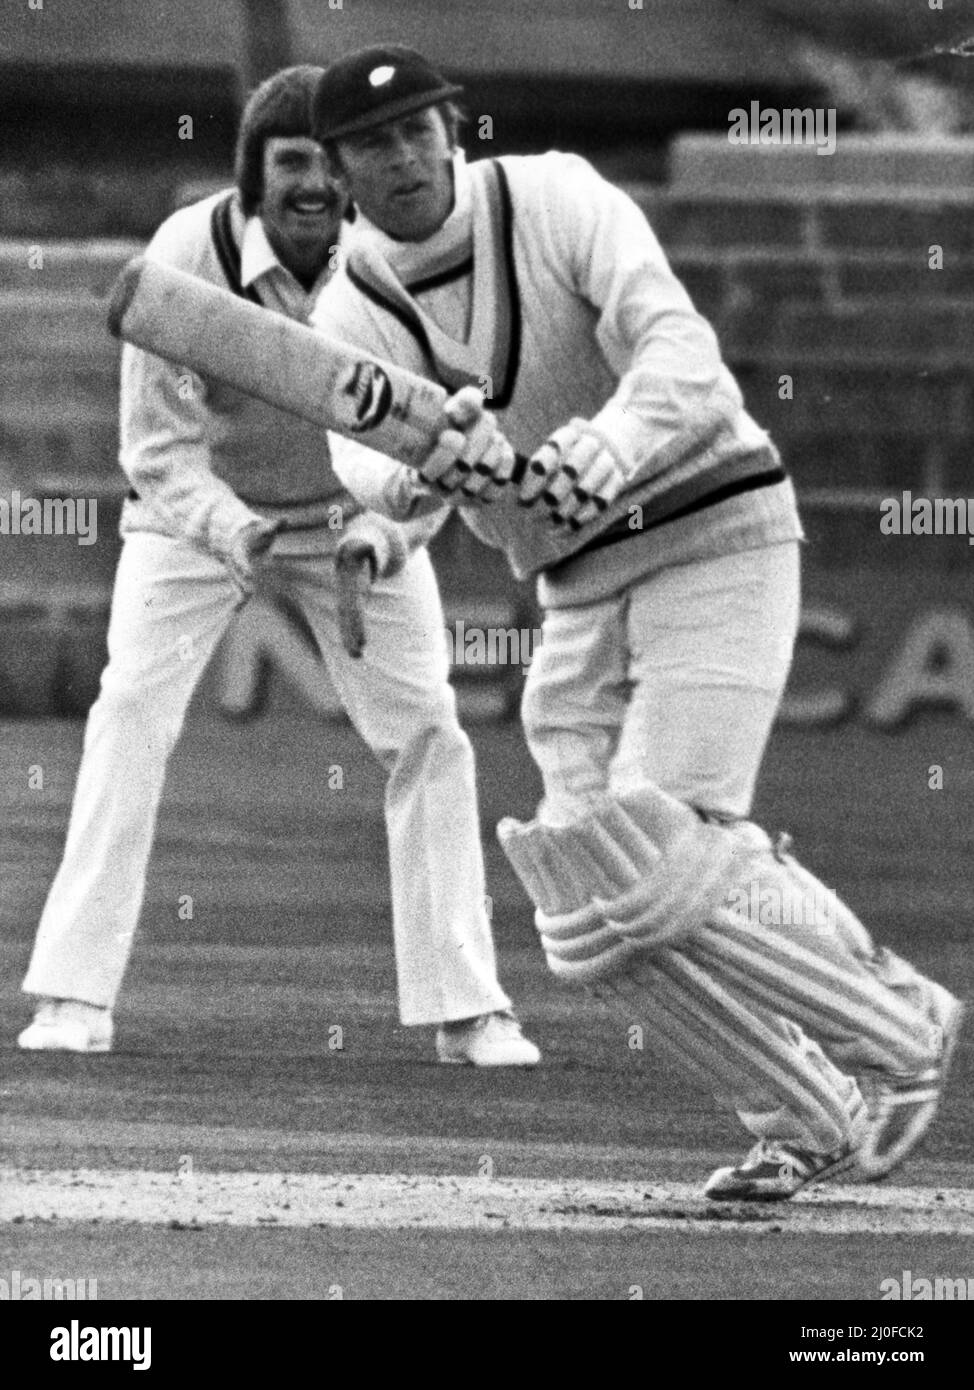 Yorkshire opening bat Geoff Boycott strokes the ball back to the bowler during his knock at Acklam Park today. 2nd May 1979. Stock Photo